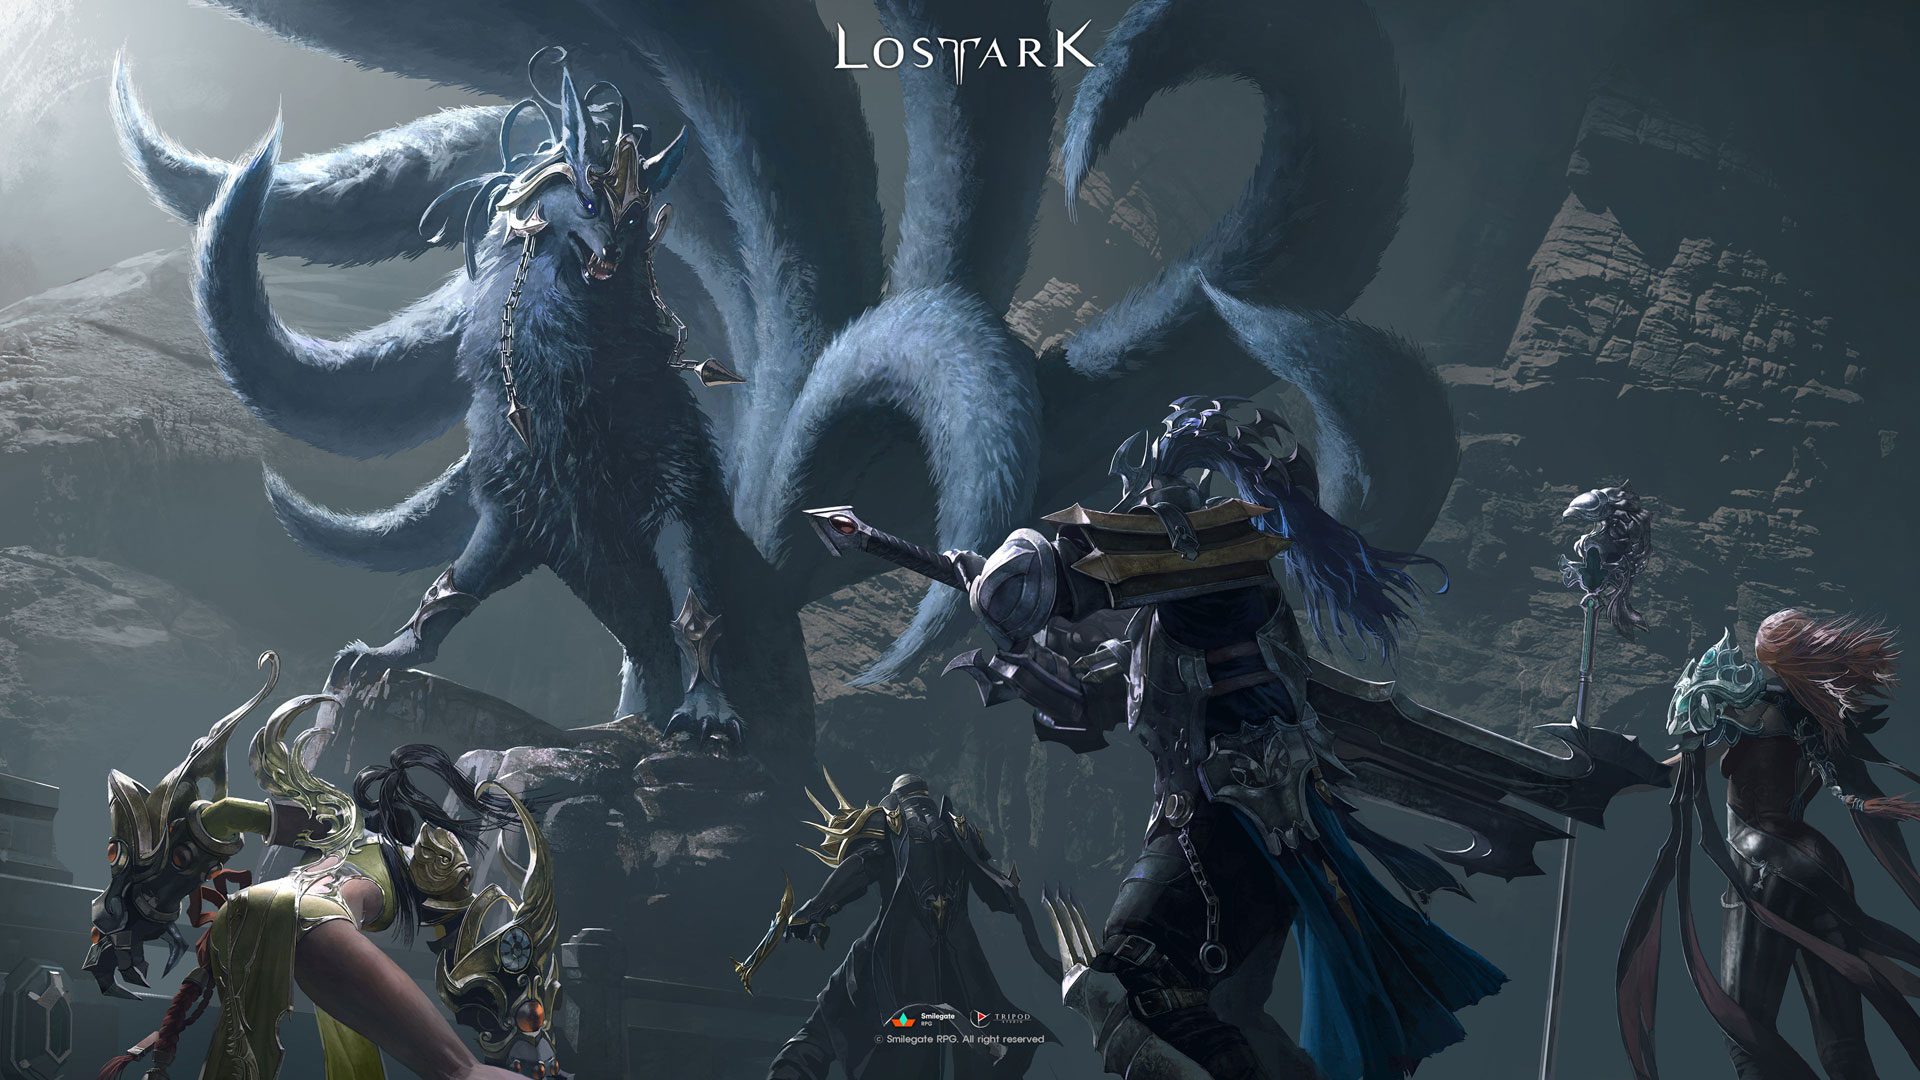 Learn the combat system before facing against formidable foes Lost Ark has to offer